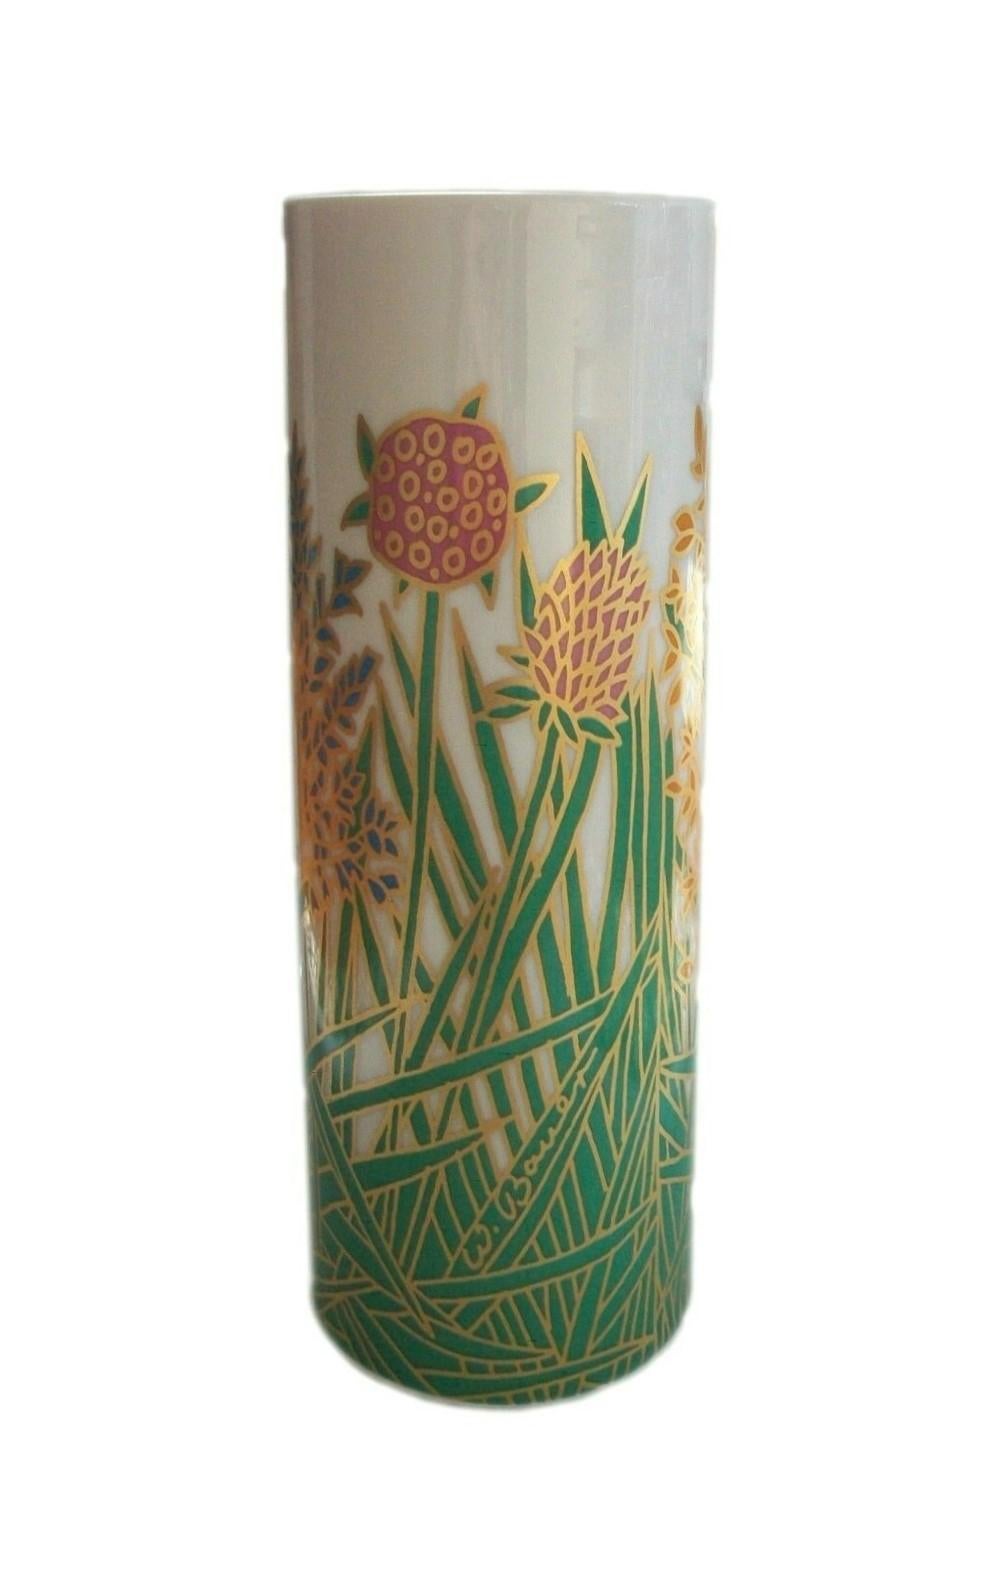 ROSENTHAL  Studio Line  Wolf Bauer (Designer) - Mid Century gilt and floral decorated vase - signed in the design - Rosenthal stamp to the base - Germany - circa 1970's.

Excellent/mint vintage condition - no loss - no damage - no restoration -